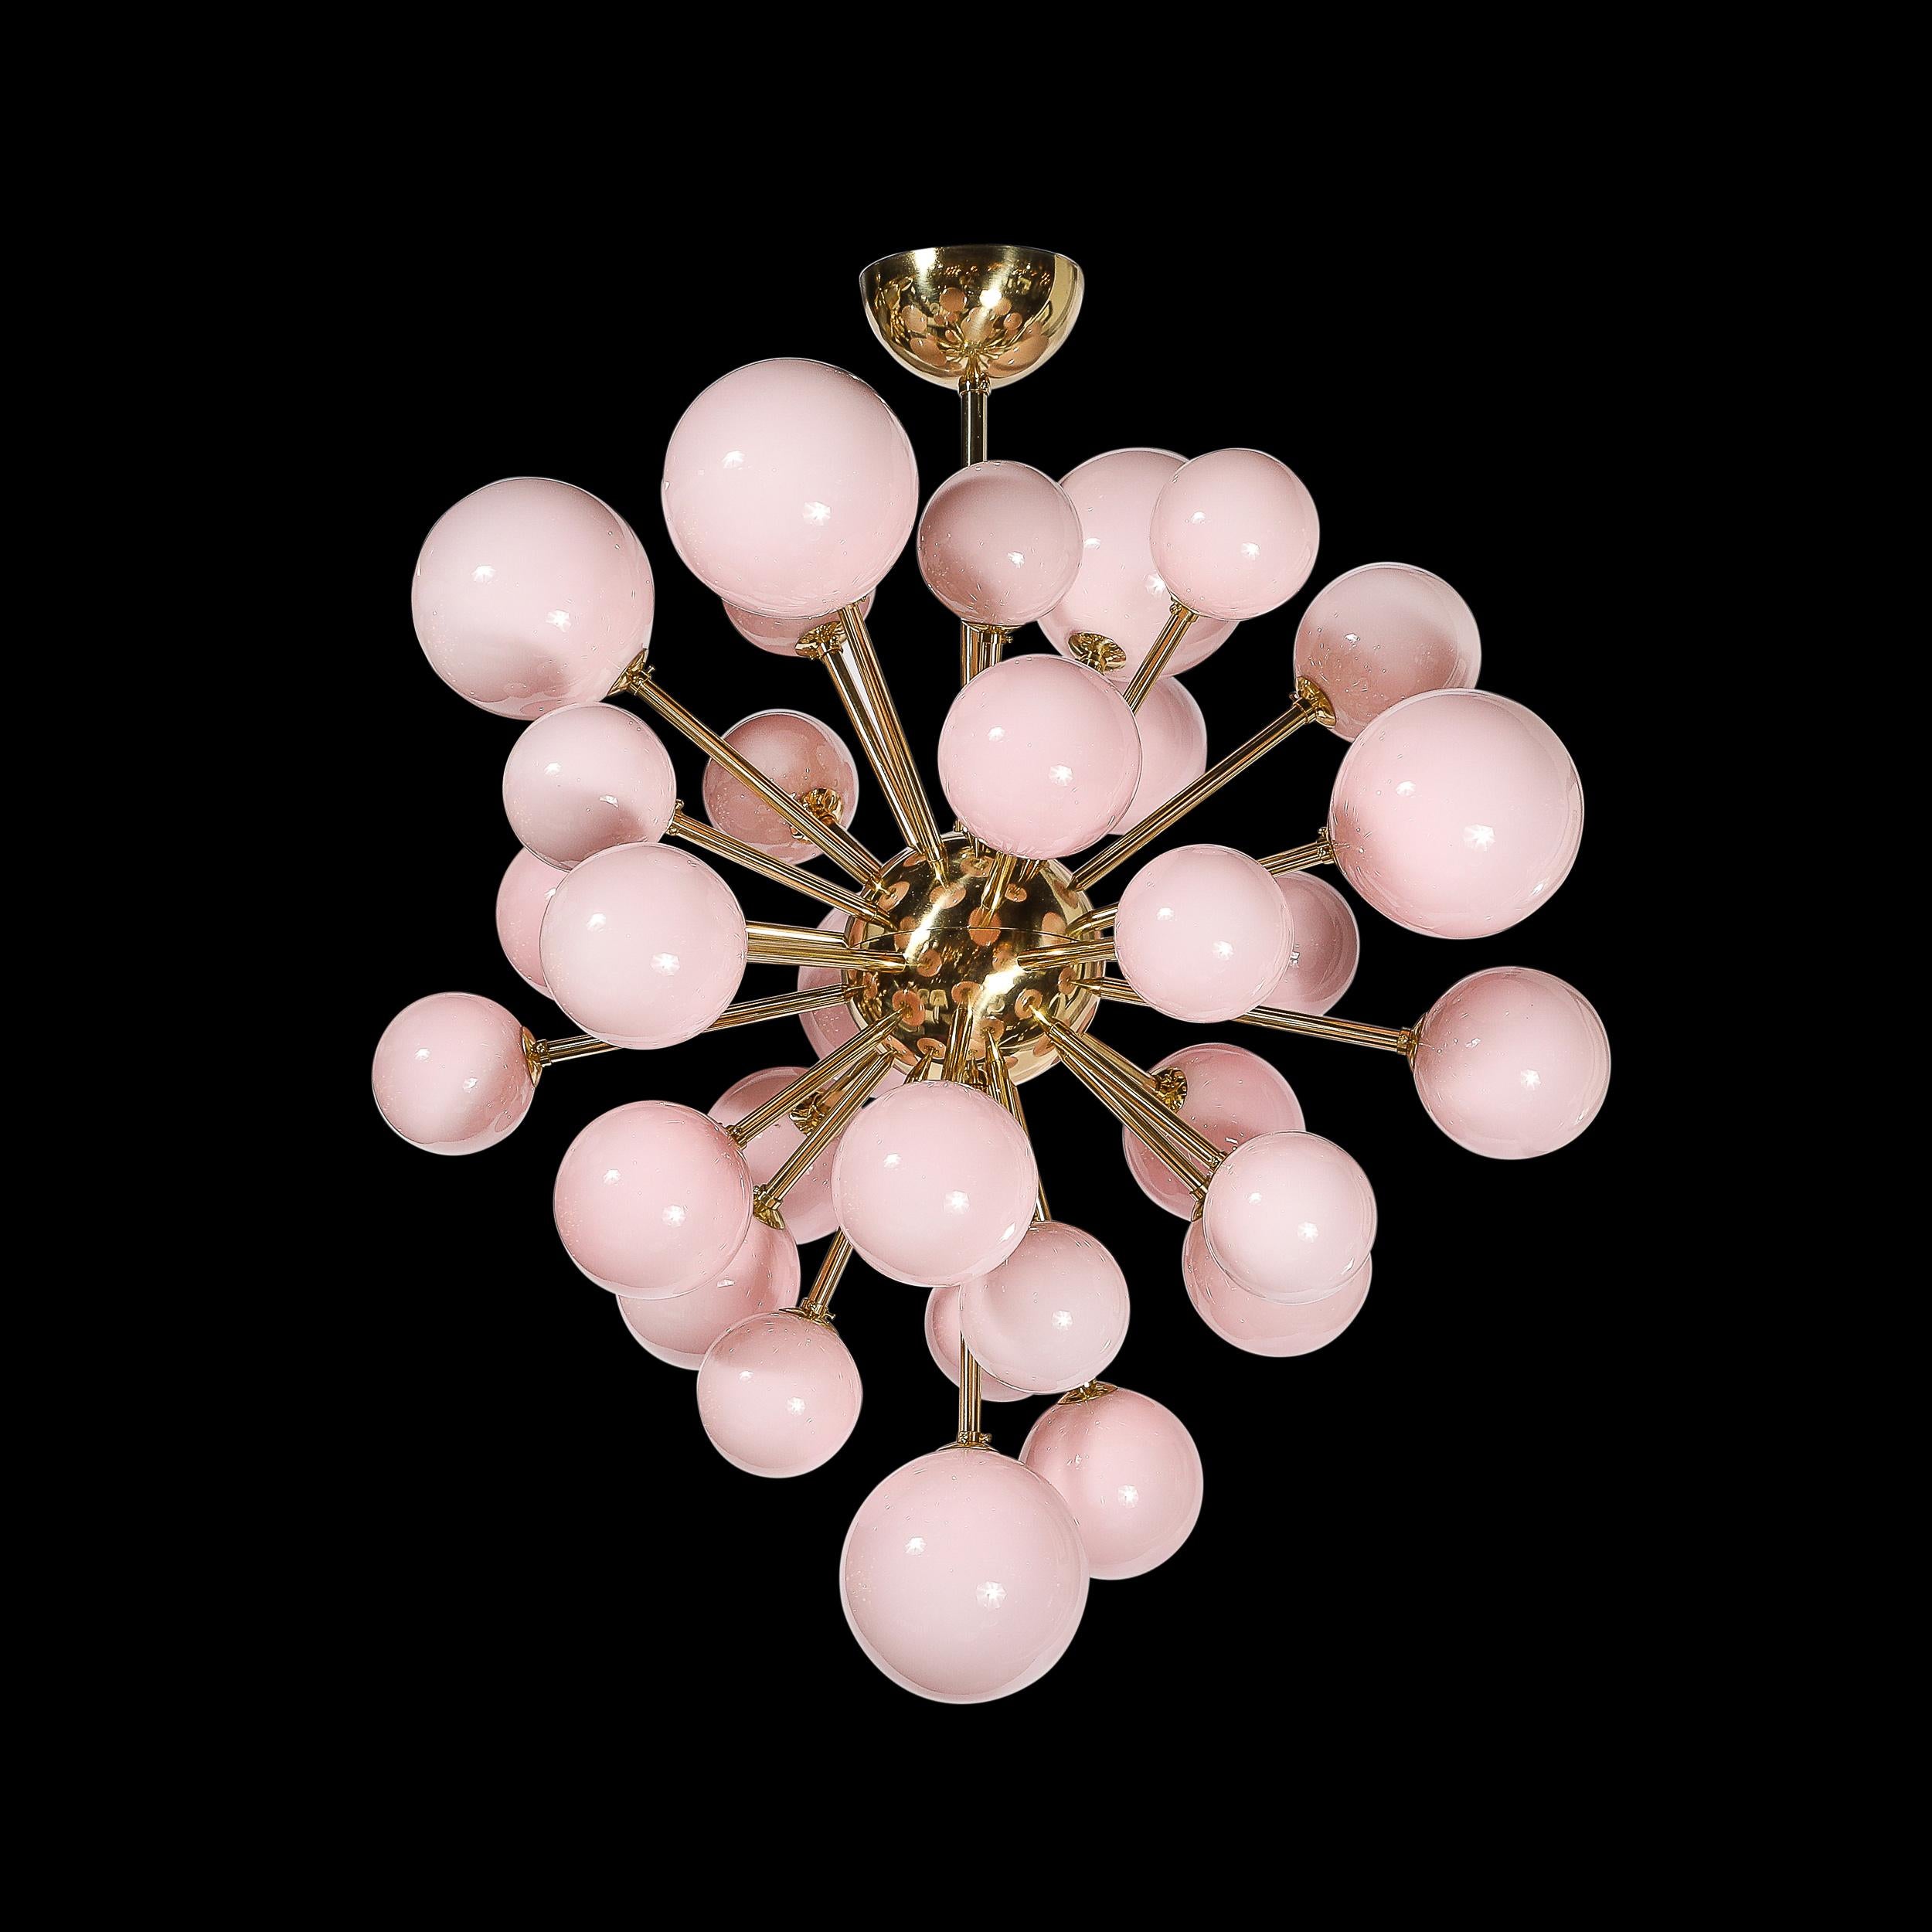 This elegant and well balanced Modernist Handblown Murano Glass Sputnik Chandelier w/ Frosted Pink Hued Shades & Brass Fittings originates from Italy during the 21st Century. Features a sputnik form with a spherical brass center from which numerous